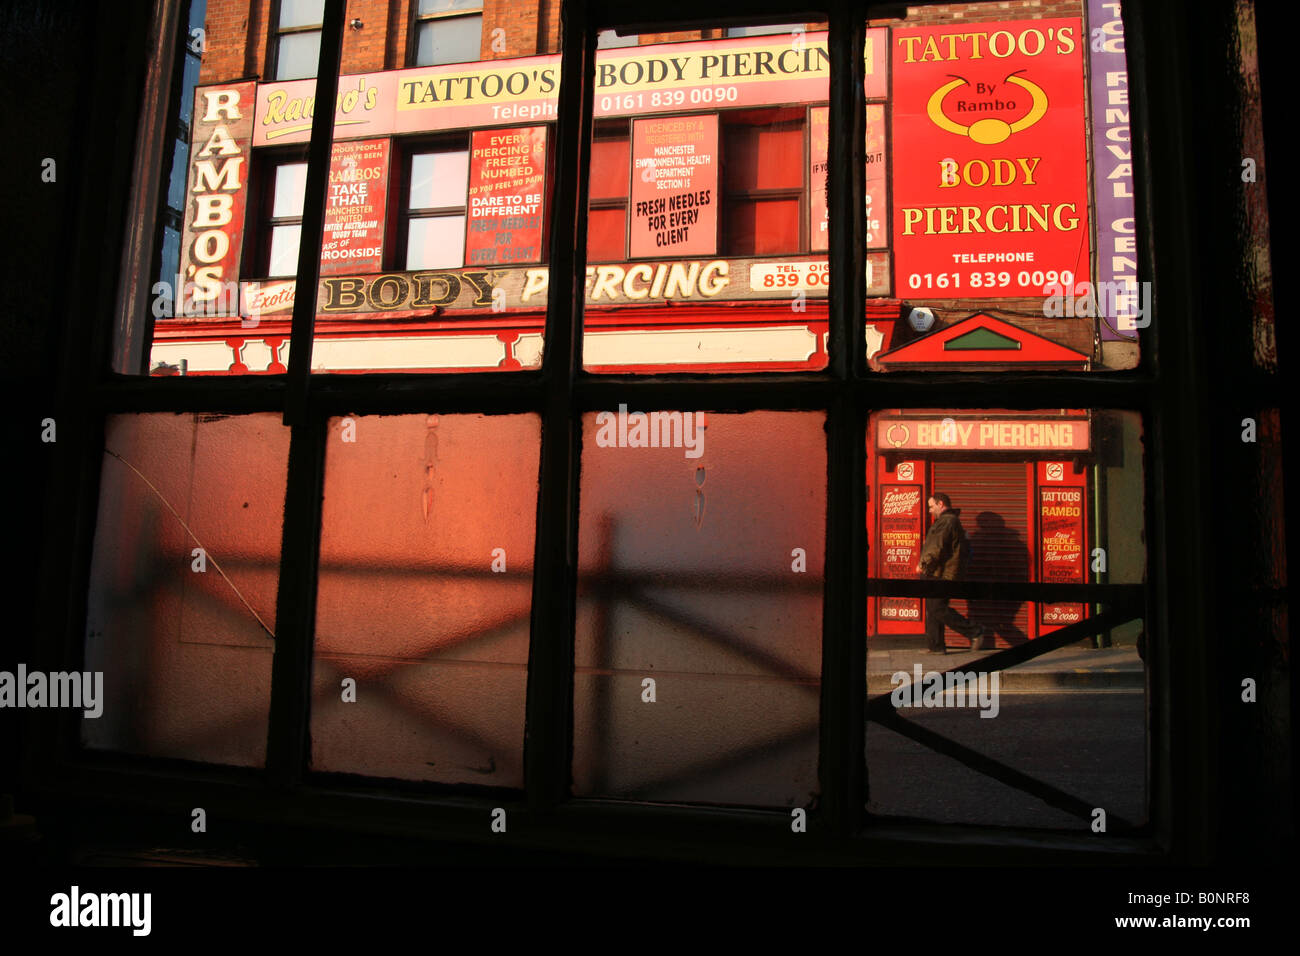 Tattoo Body Piercing Shop framed through a café window in the Northern Quarter  Manchester UK' Stock Photo